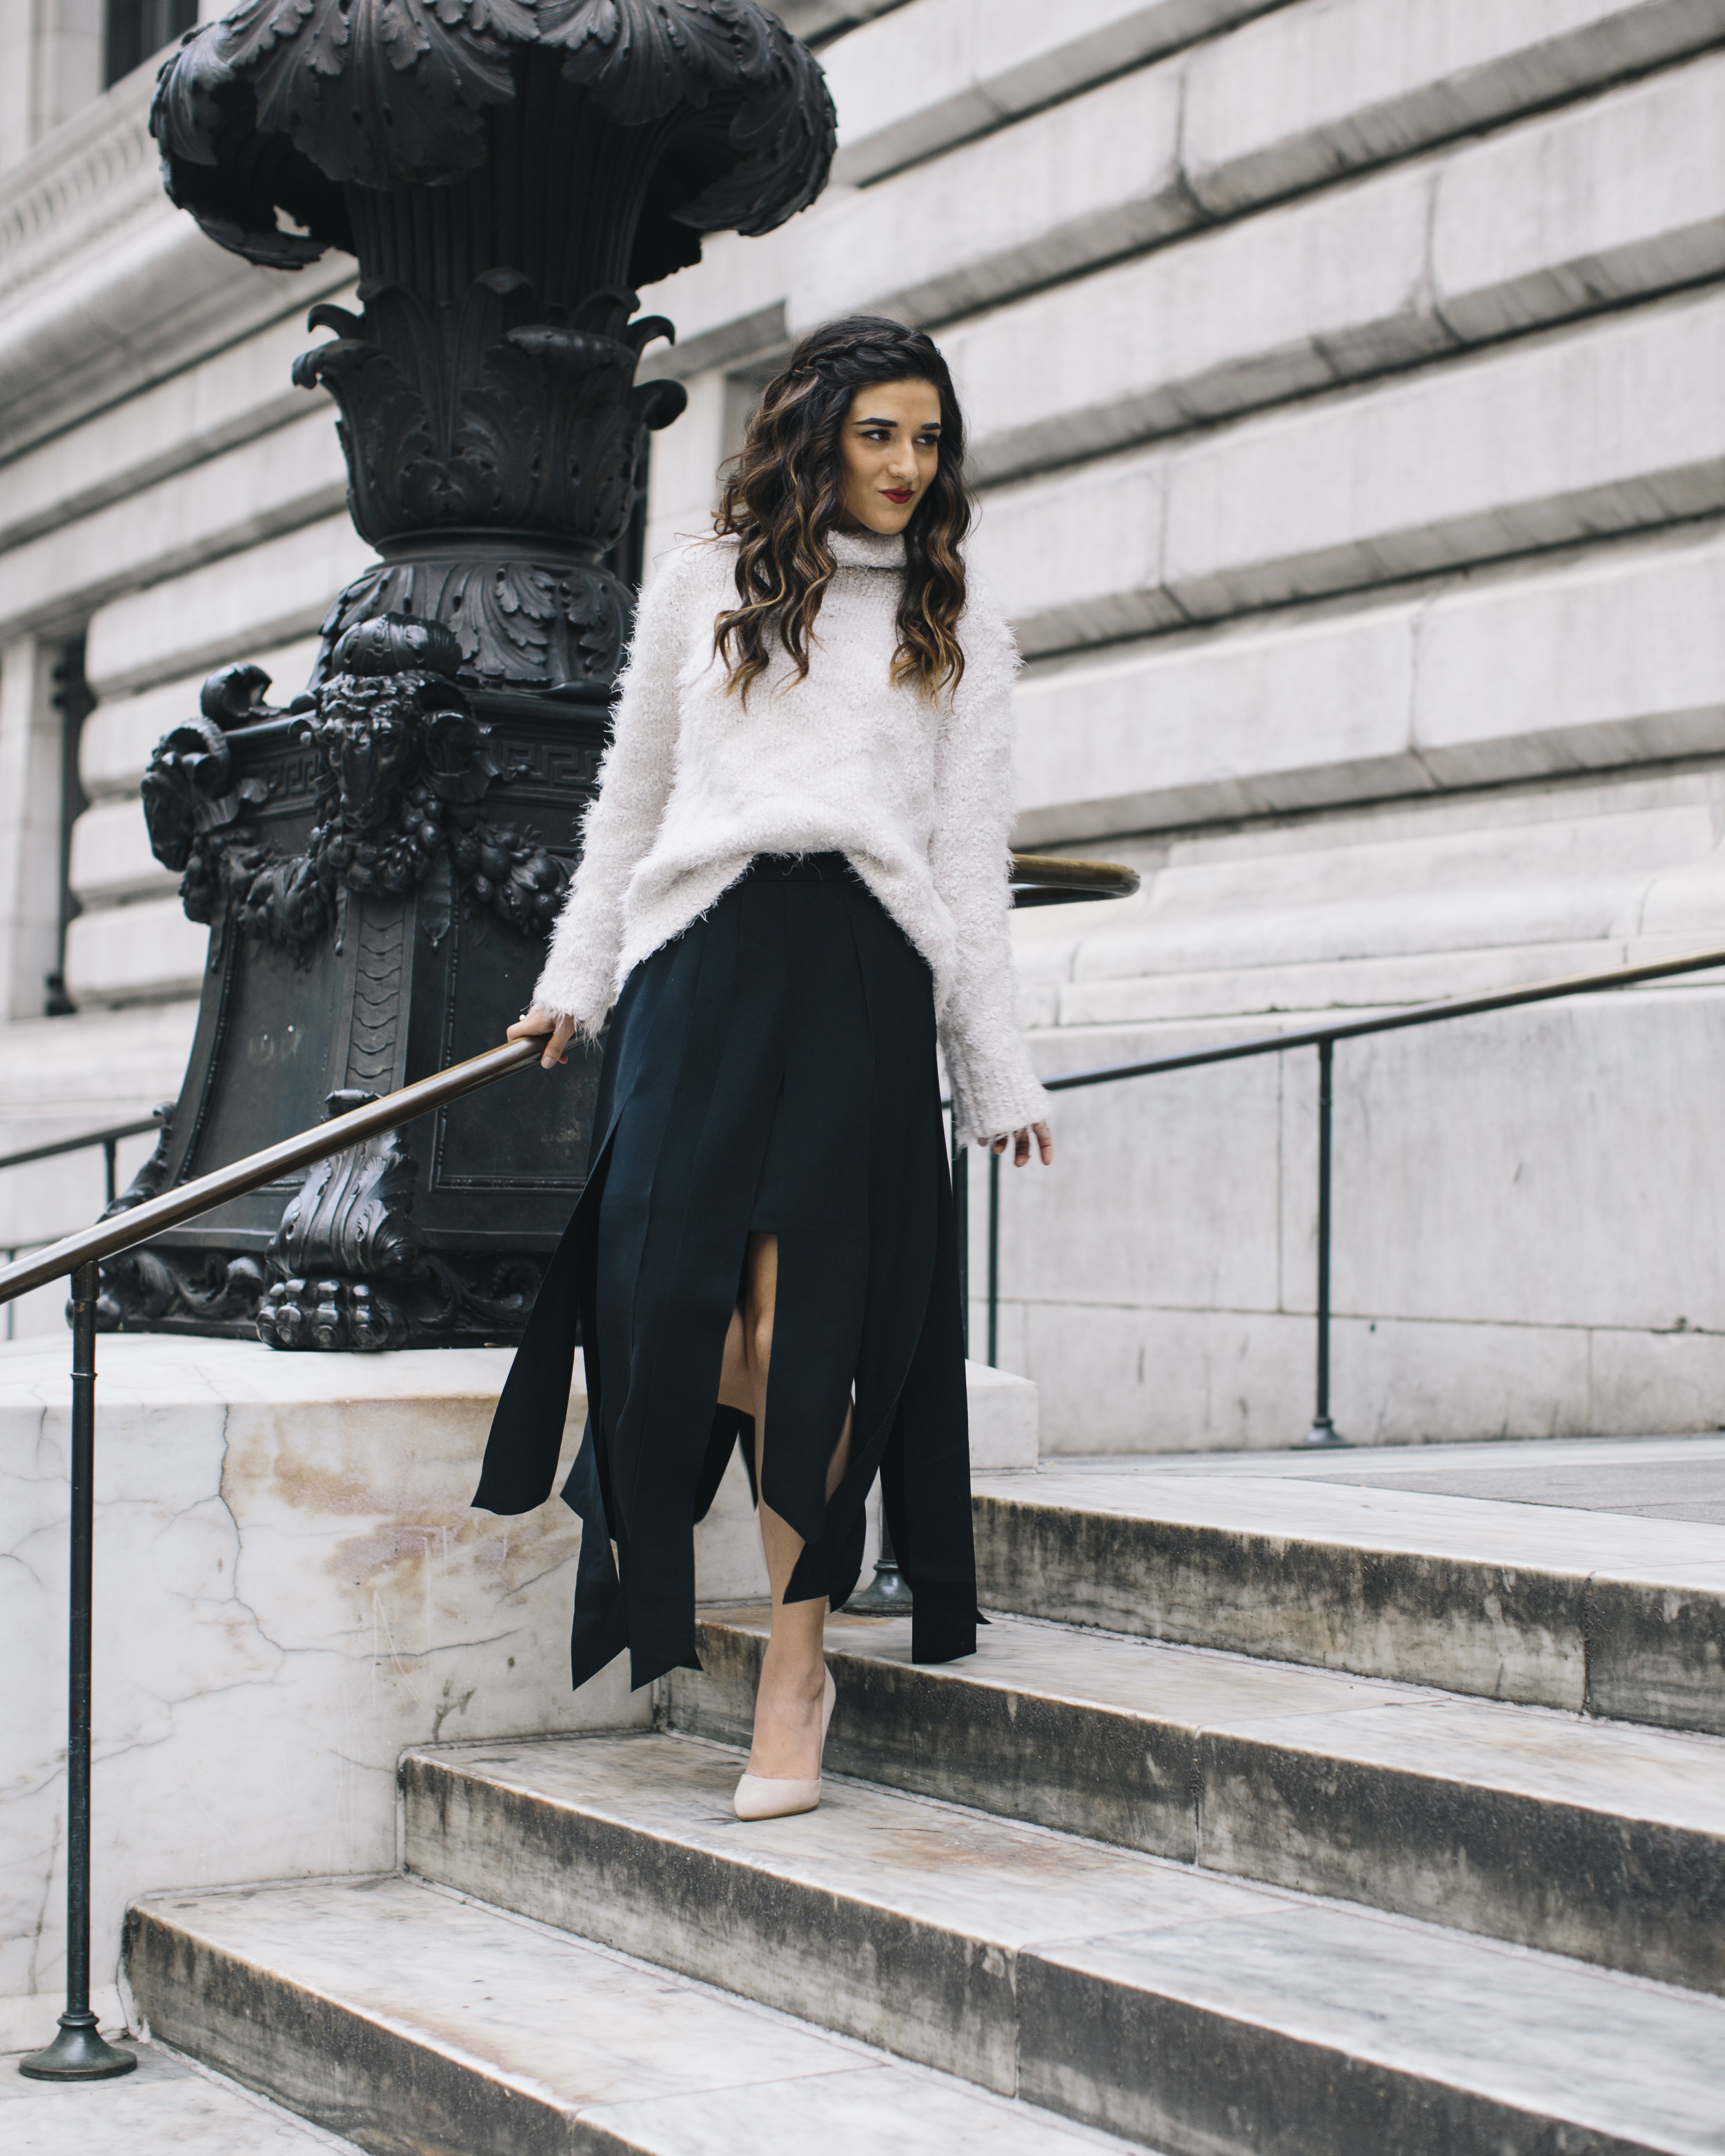 Shopping with Octer Fringe Skirt Louboutins & Love Fashion Blog Esther Santer NYC Street Style Blogger Outfit OOTD Buy Trendy Sweater Cozy Zara Steve Madden Nude Heels Neutral Colors Navy White Winter Photoshoot New York City Hair Beautiful Women Girl.jpg